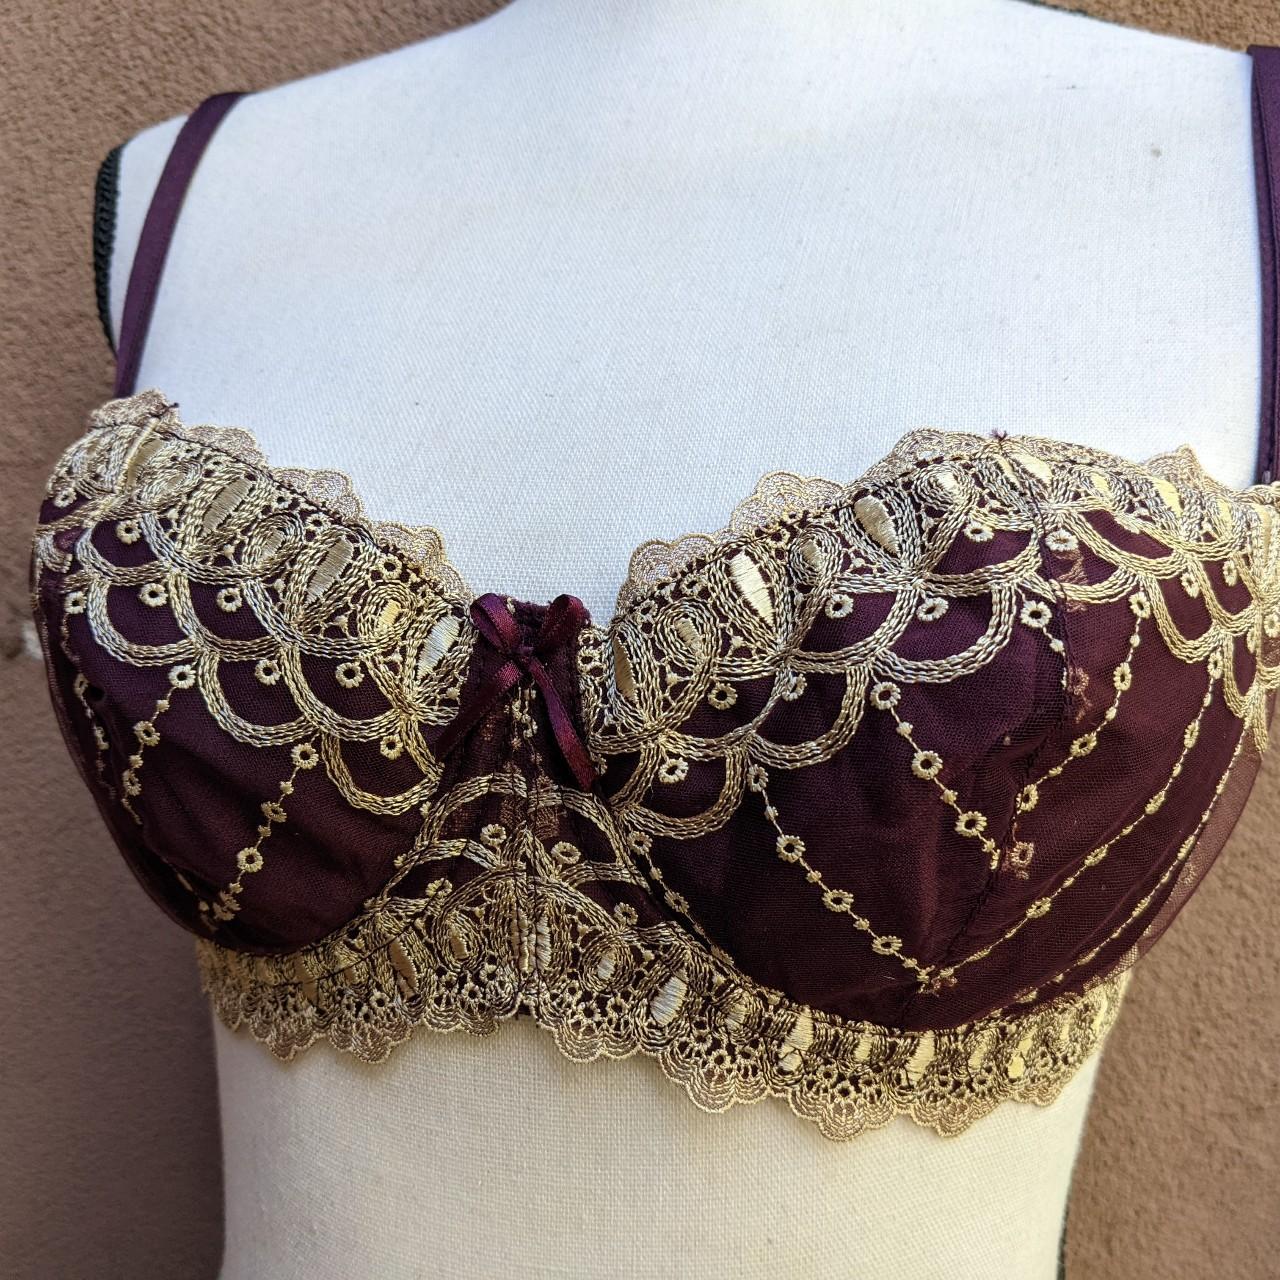 Frederick's of Hollywood Women's Burgundy and Gold Bra (3)